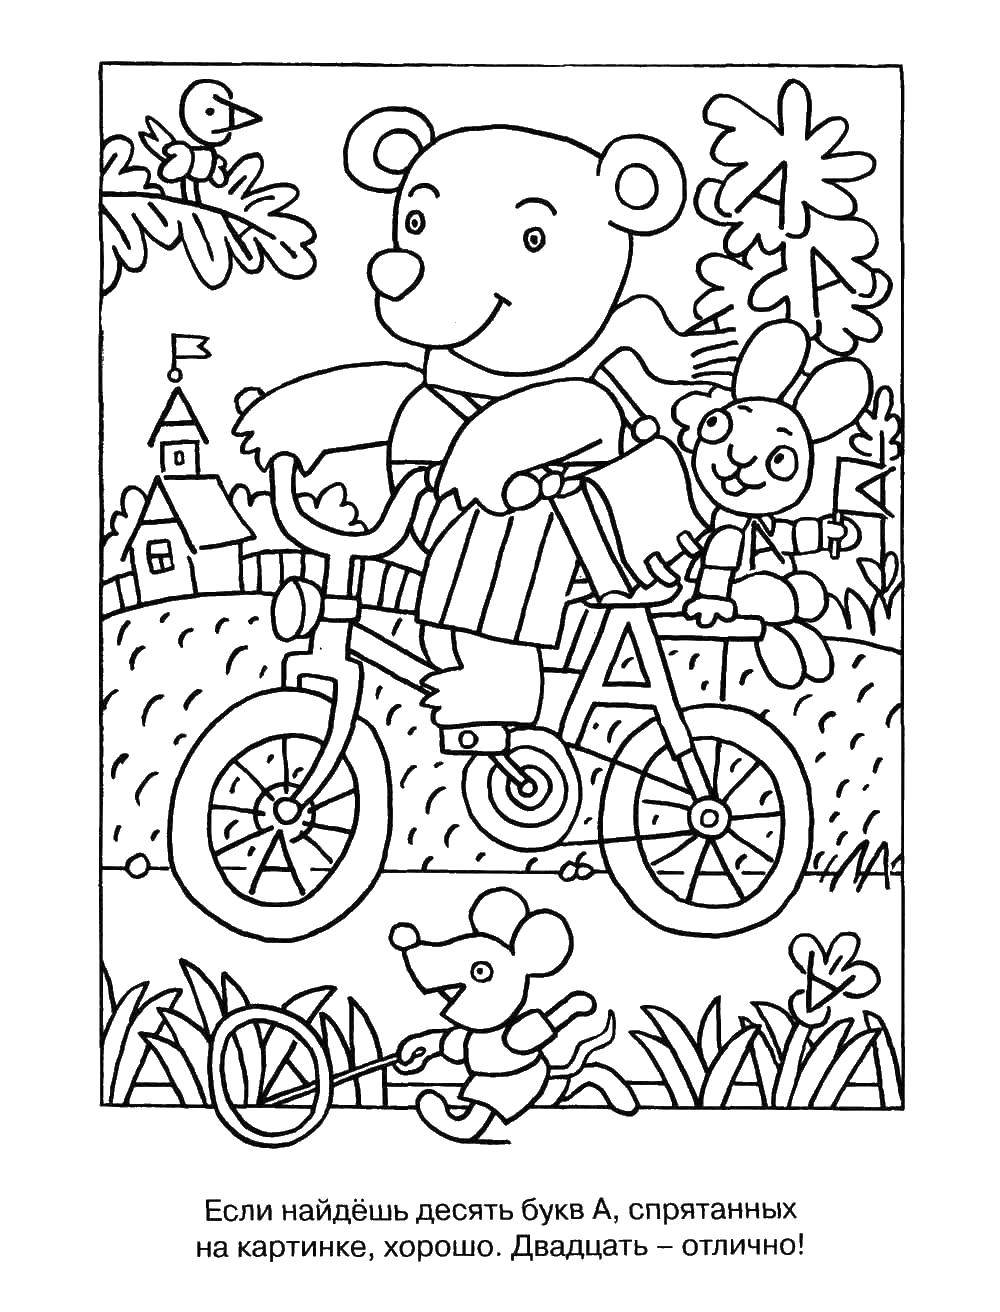 Coloring Bear on a bike. Category coloring find the letter. Tags:  bear , Bicycle, alphabets, Bunny.